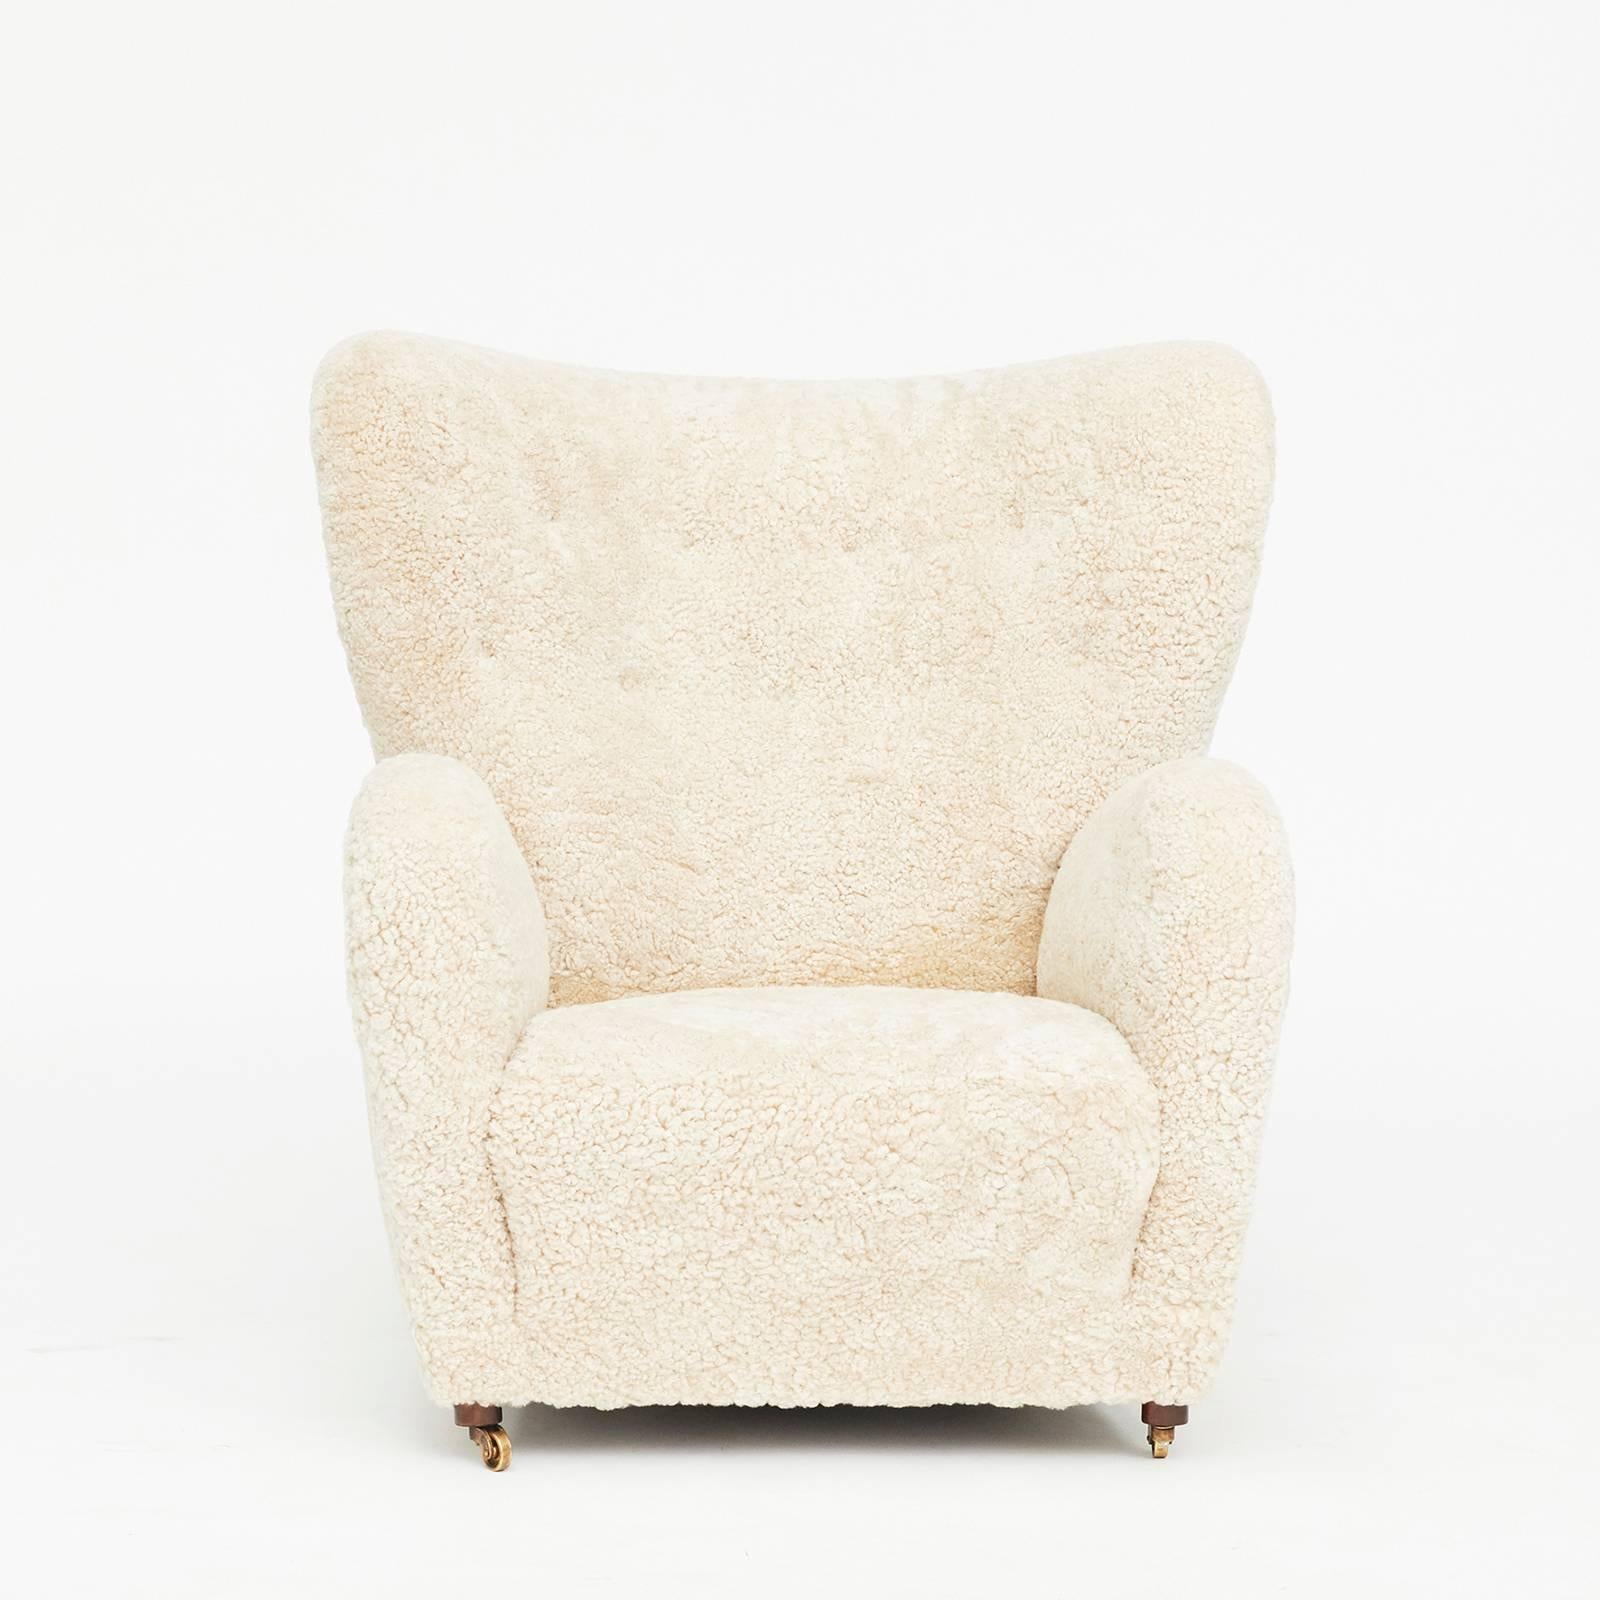 Flemming Lassen style Easychair. Freestanding. Upholstered with white sheepskin. Front legs with wheels. Manufactured in Denmark, circa 1940.